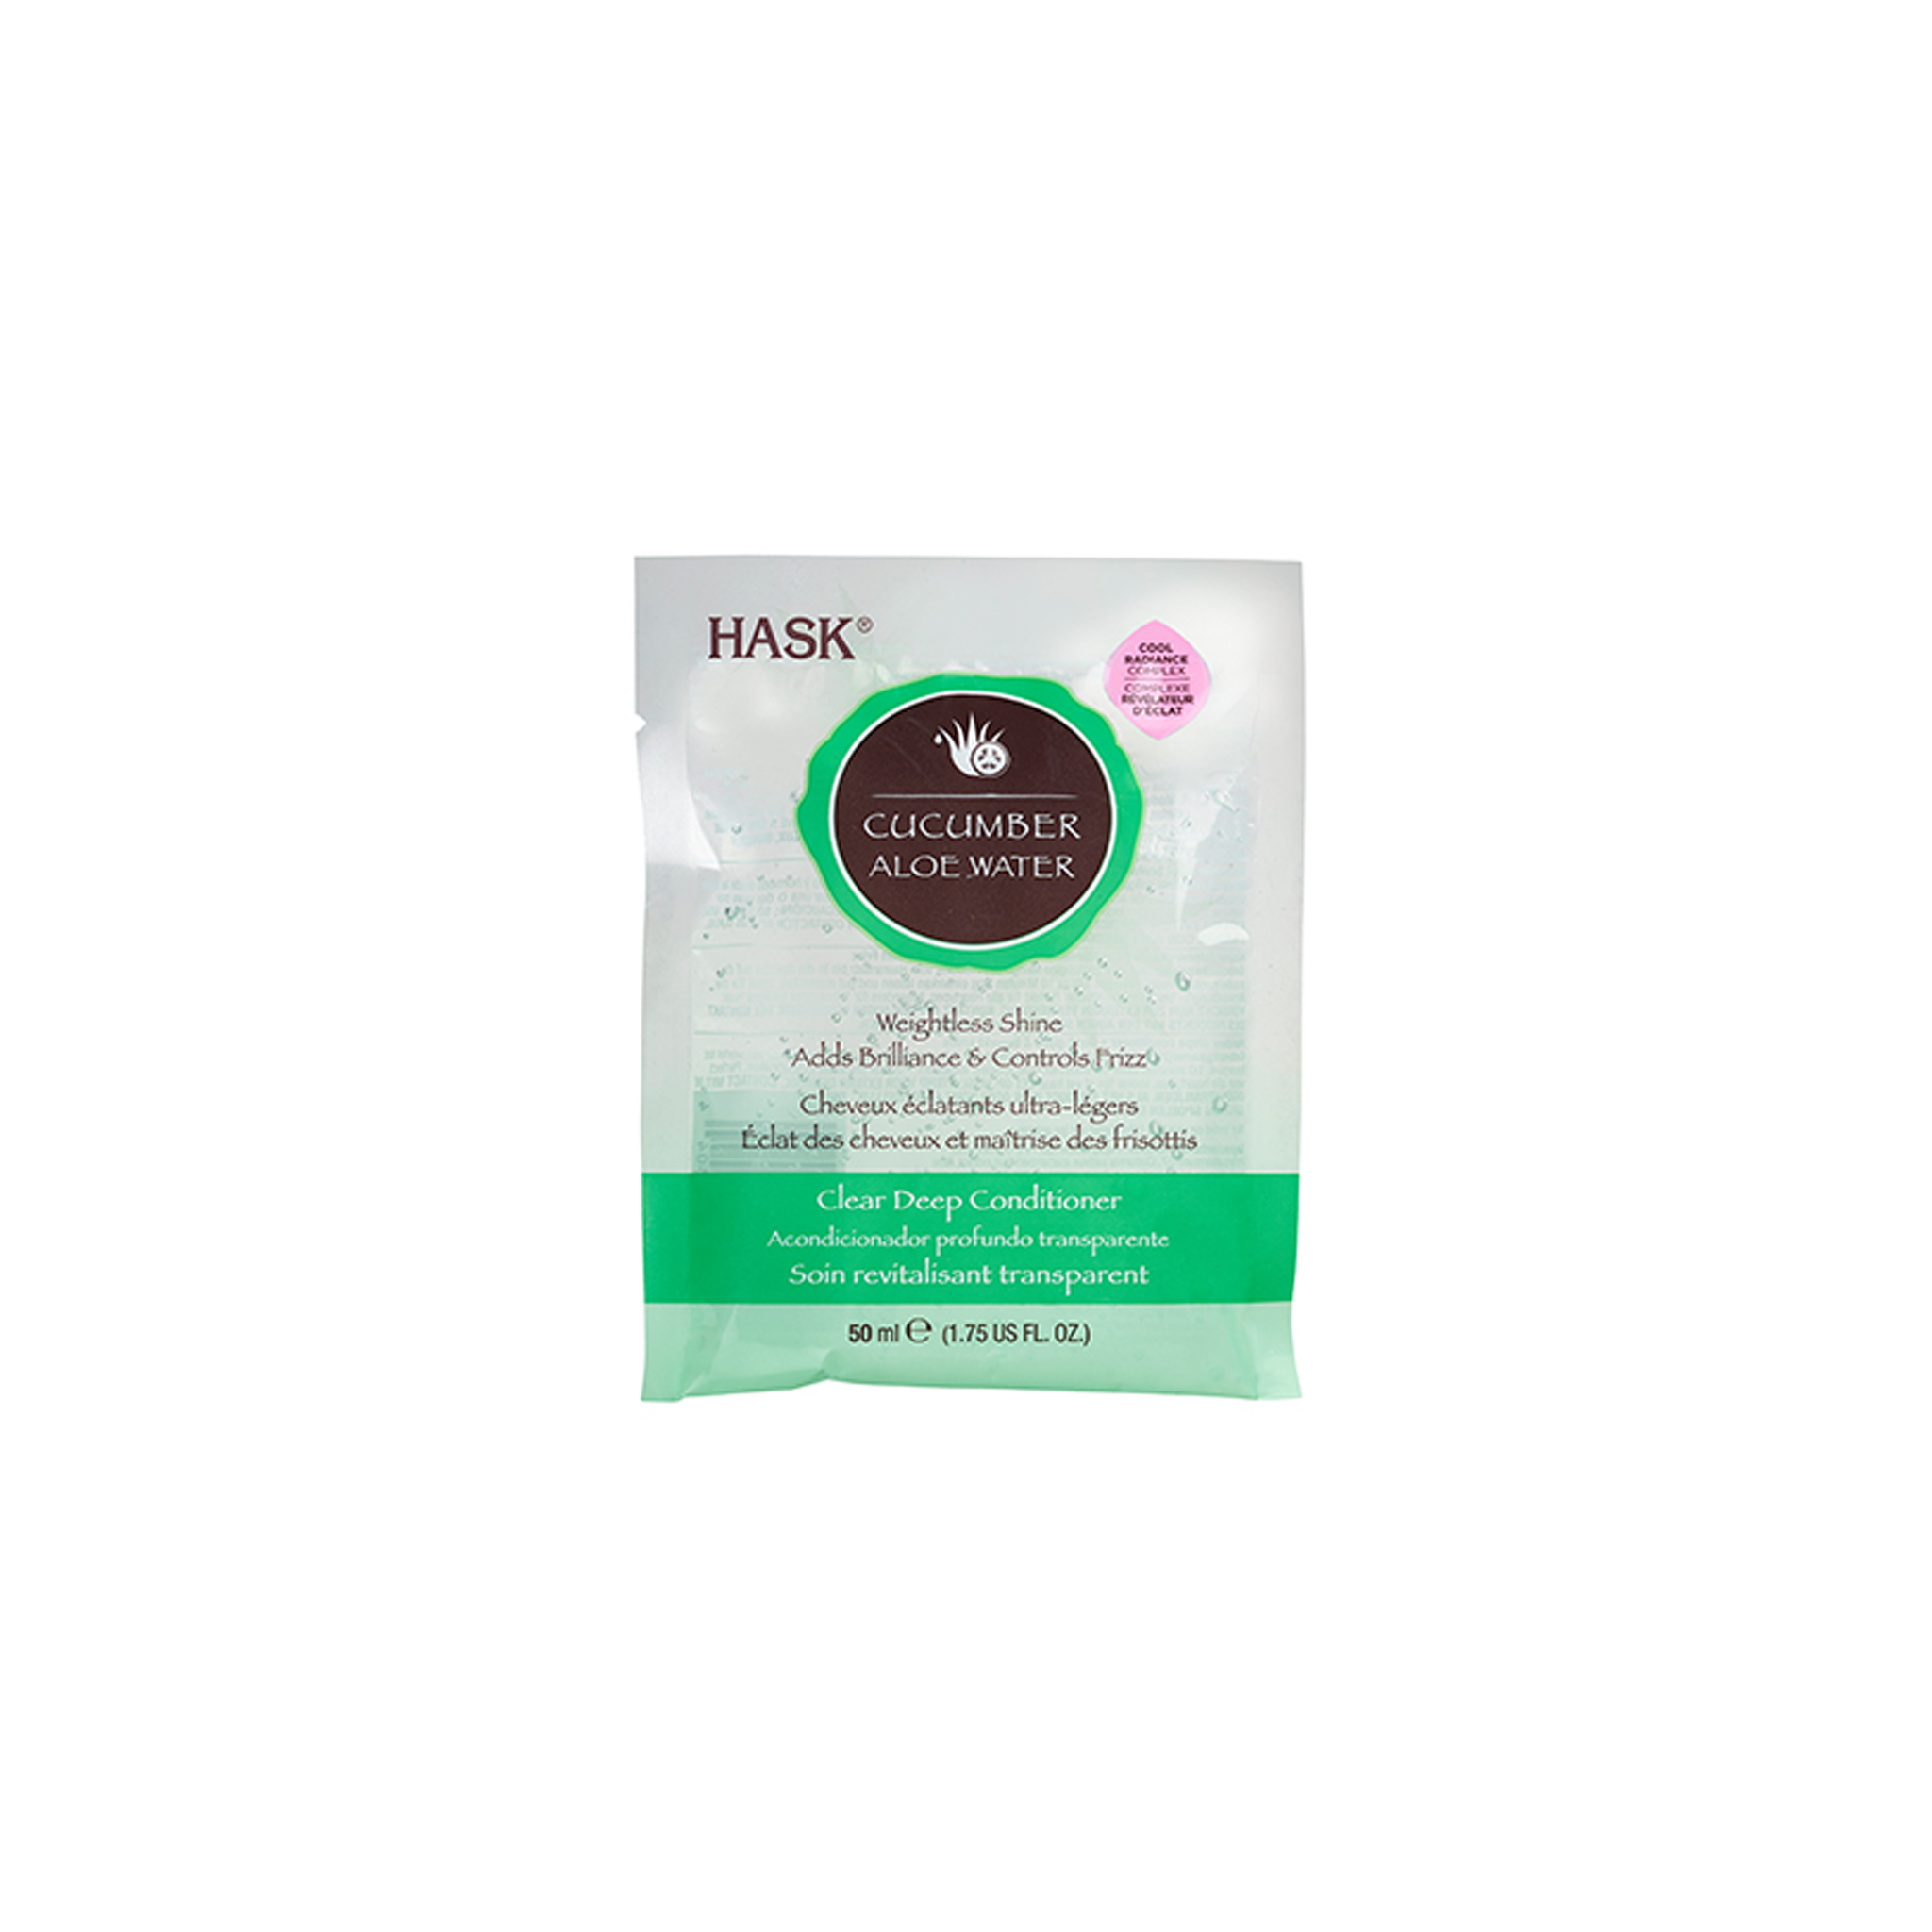 Hask Cucumber Aloe Water Clear Deep Conditioner